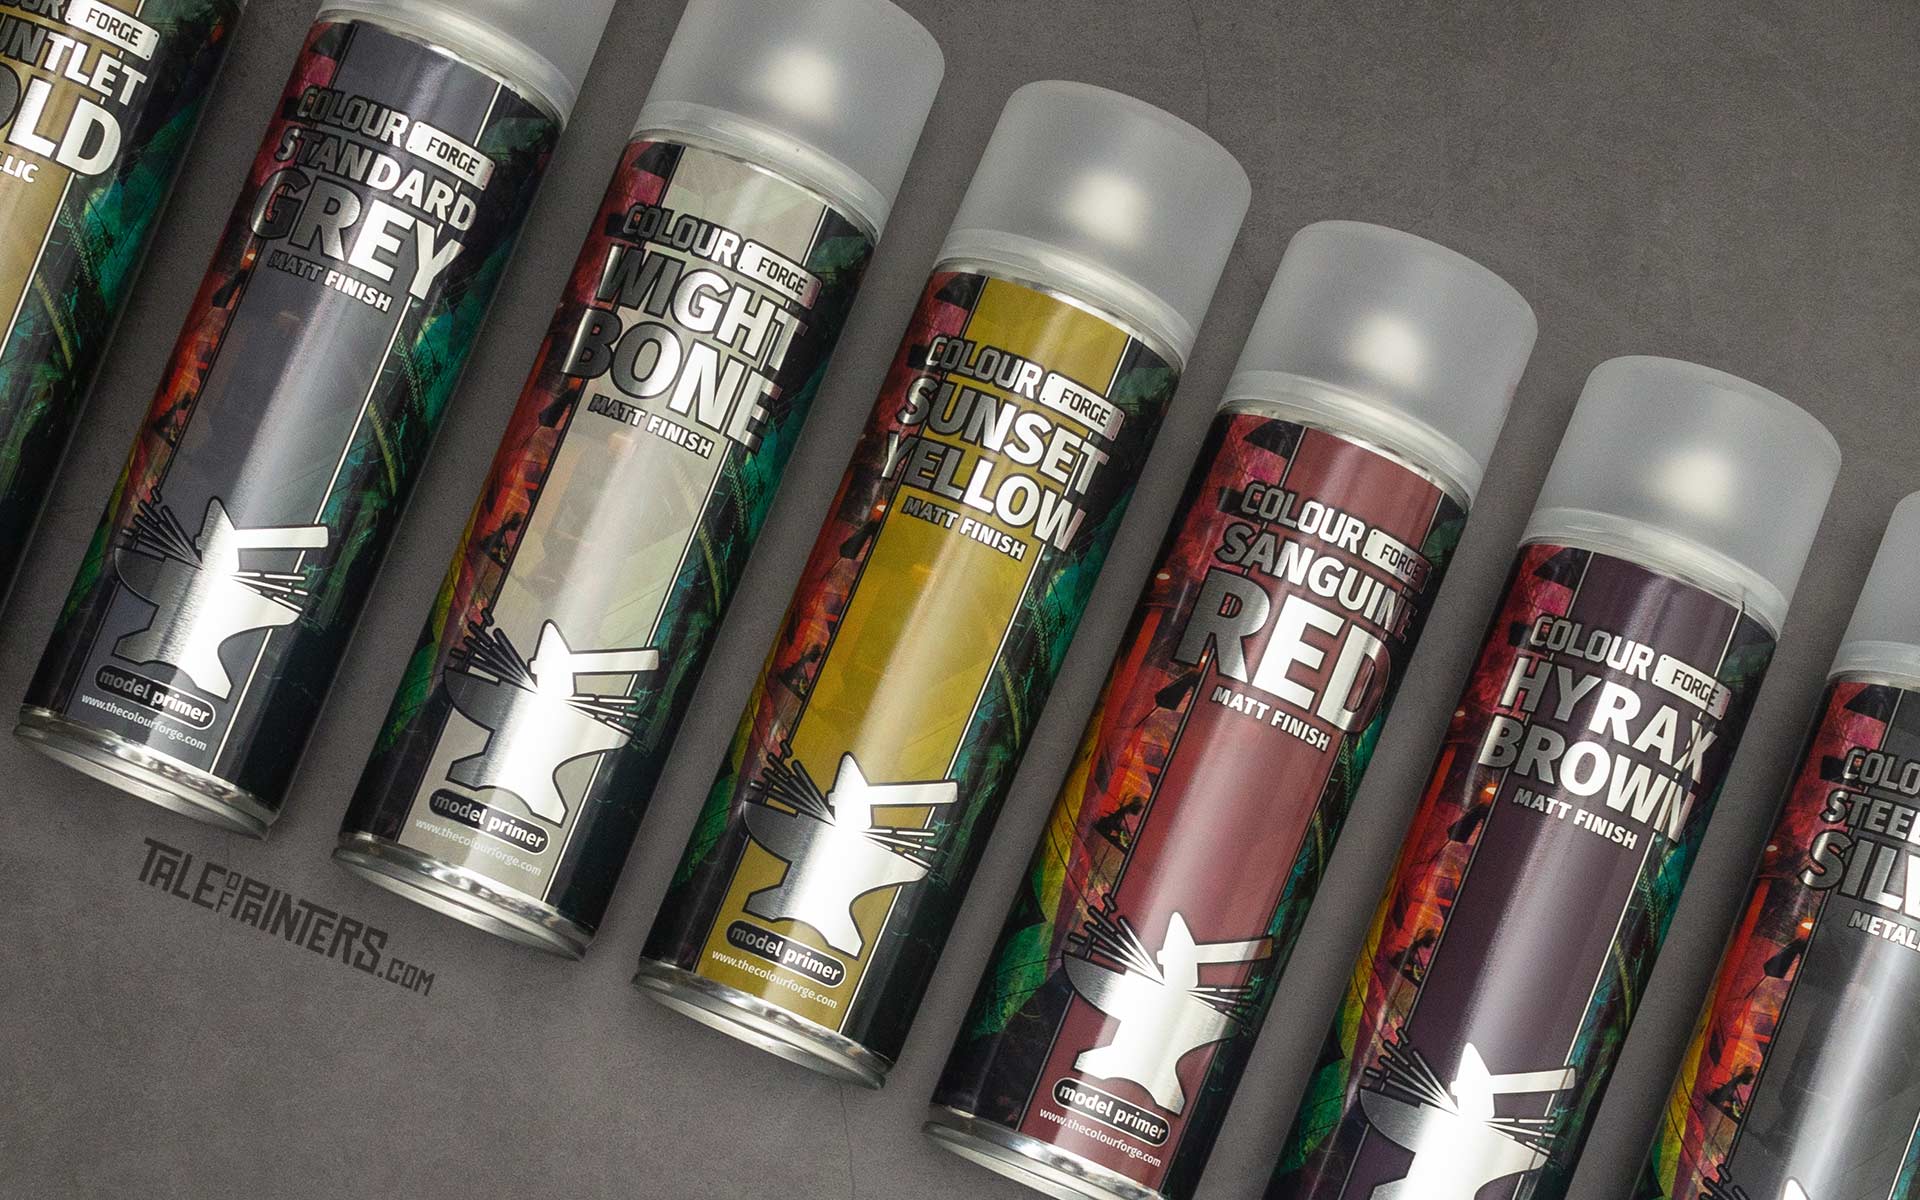 Colour Forge spray paint cans on a grey background